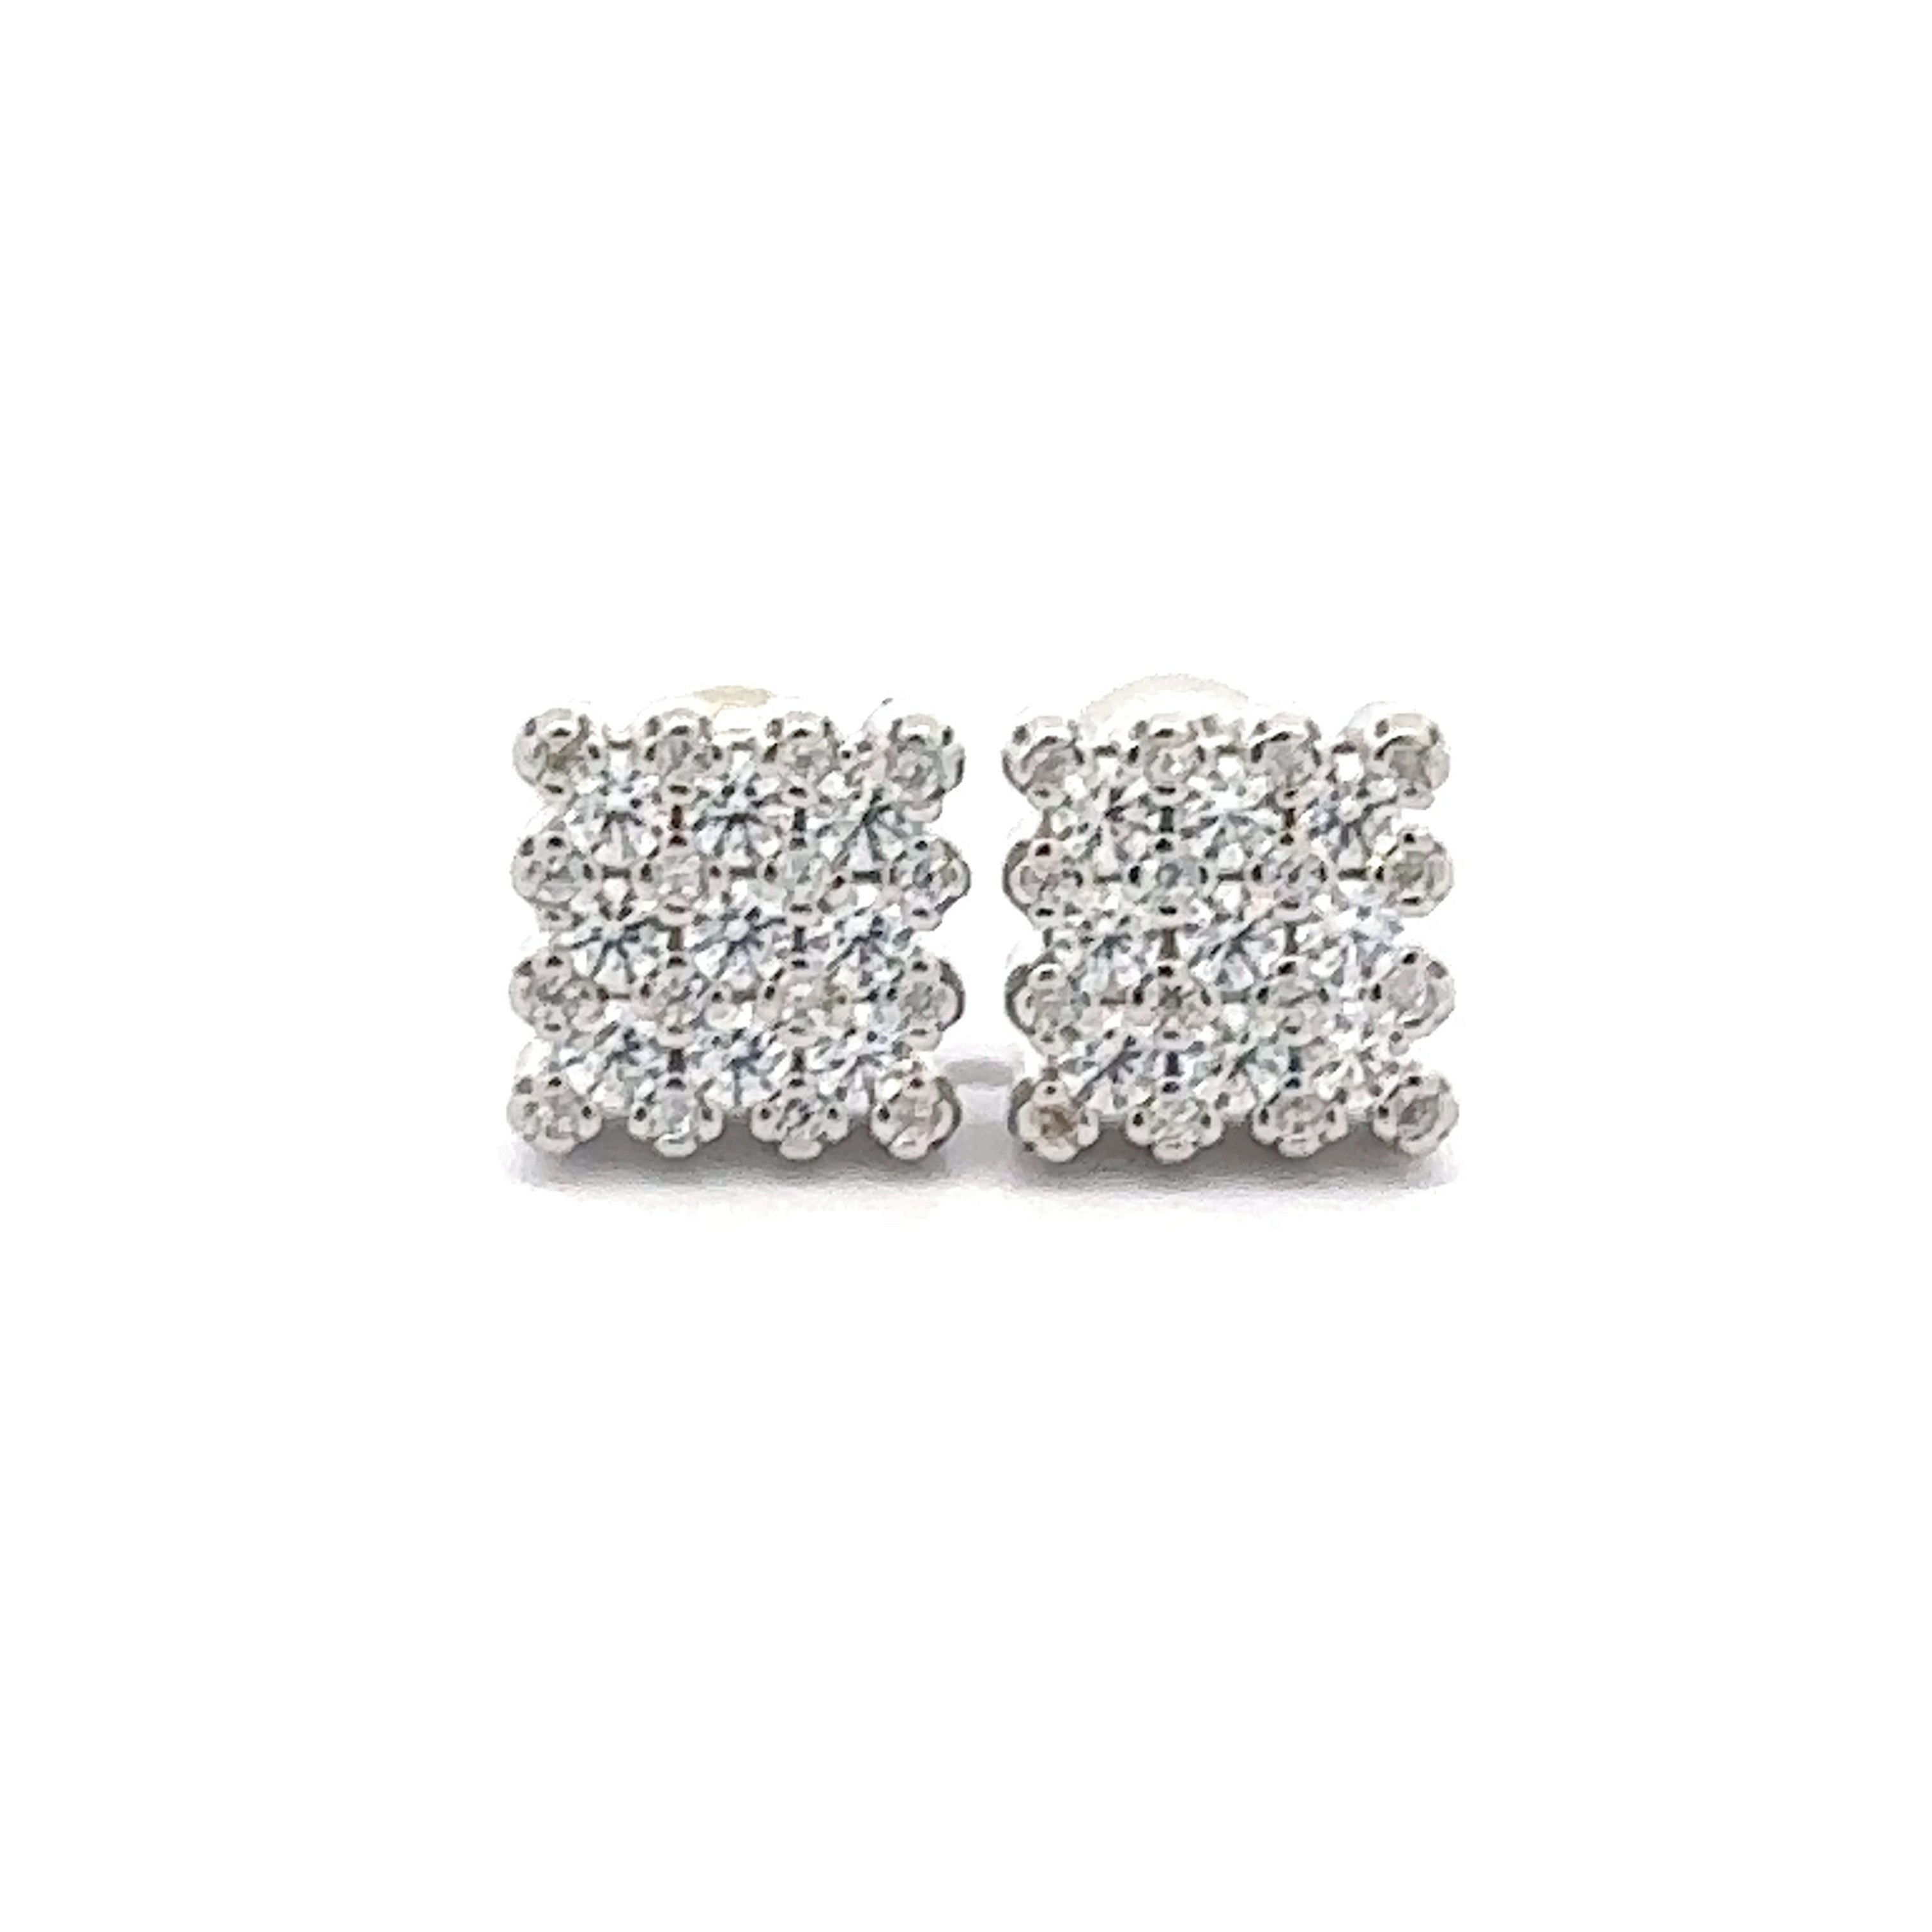 ASTRAEA 925 CZ RHODIUM ICED OUT EARRINGS | 9220101